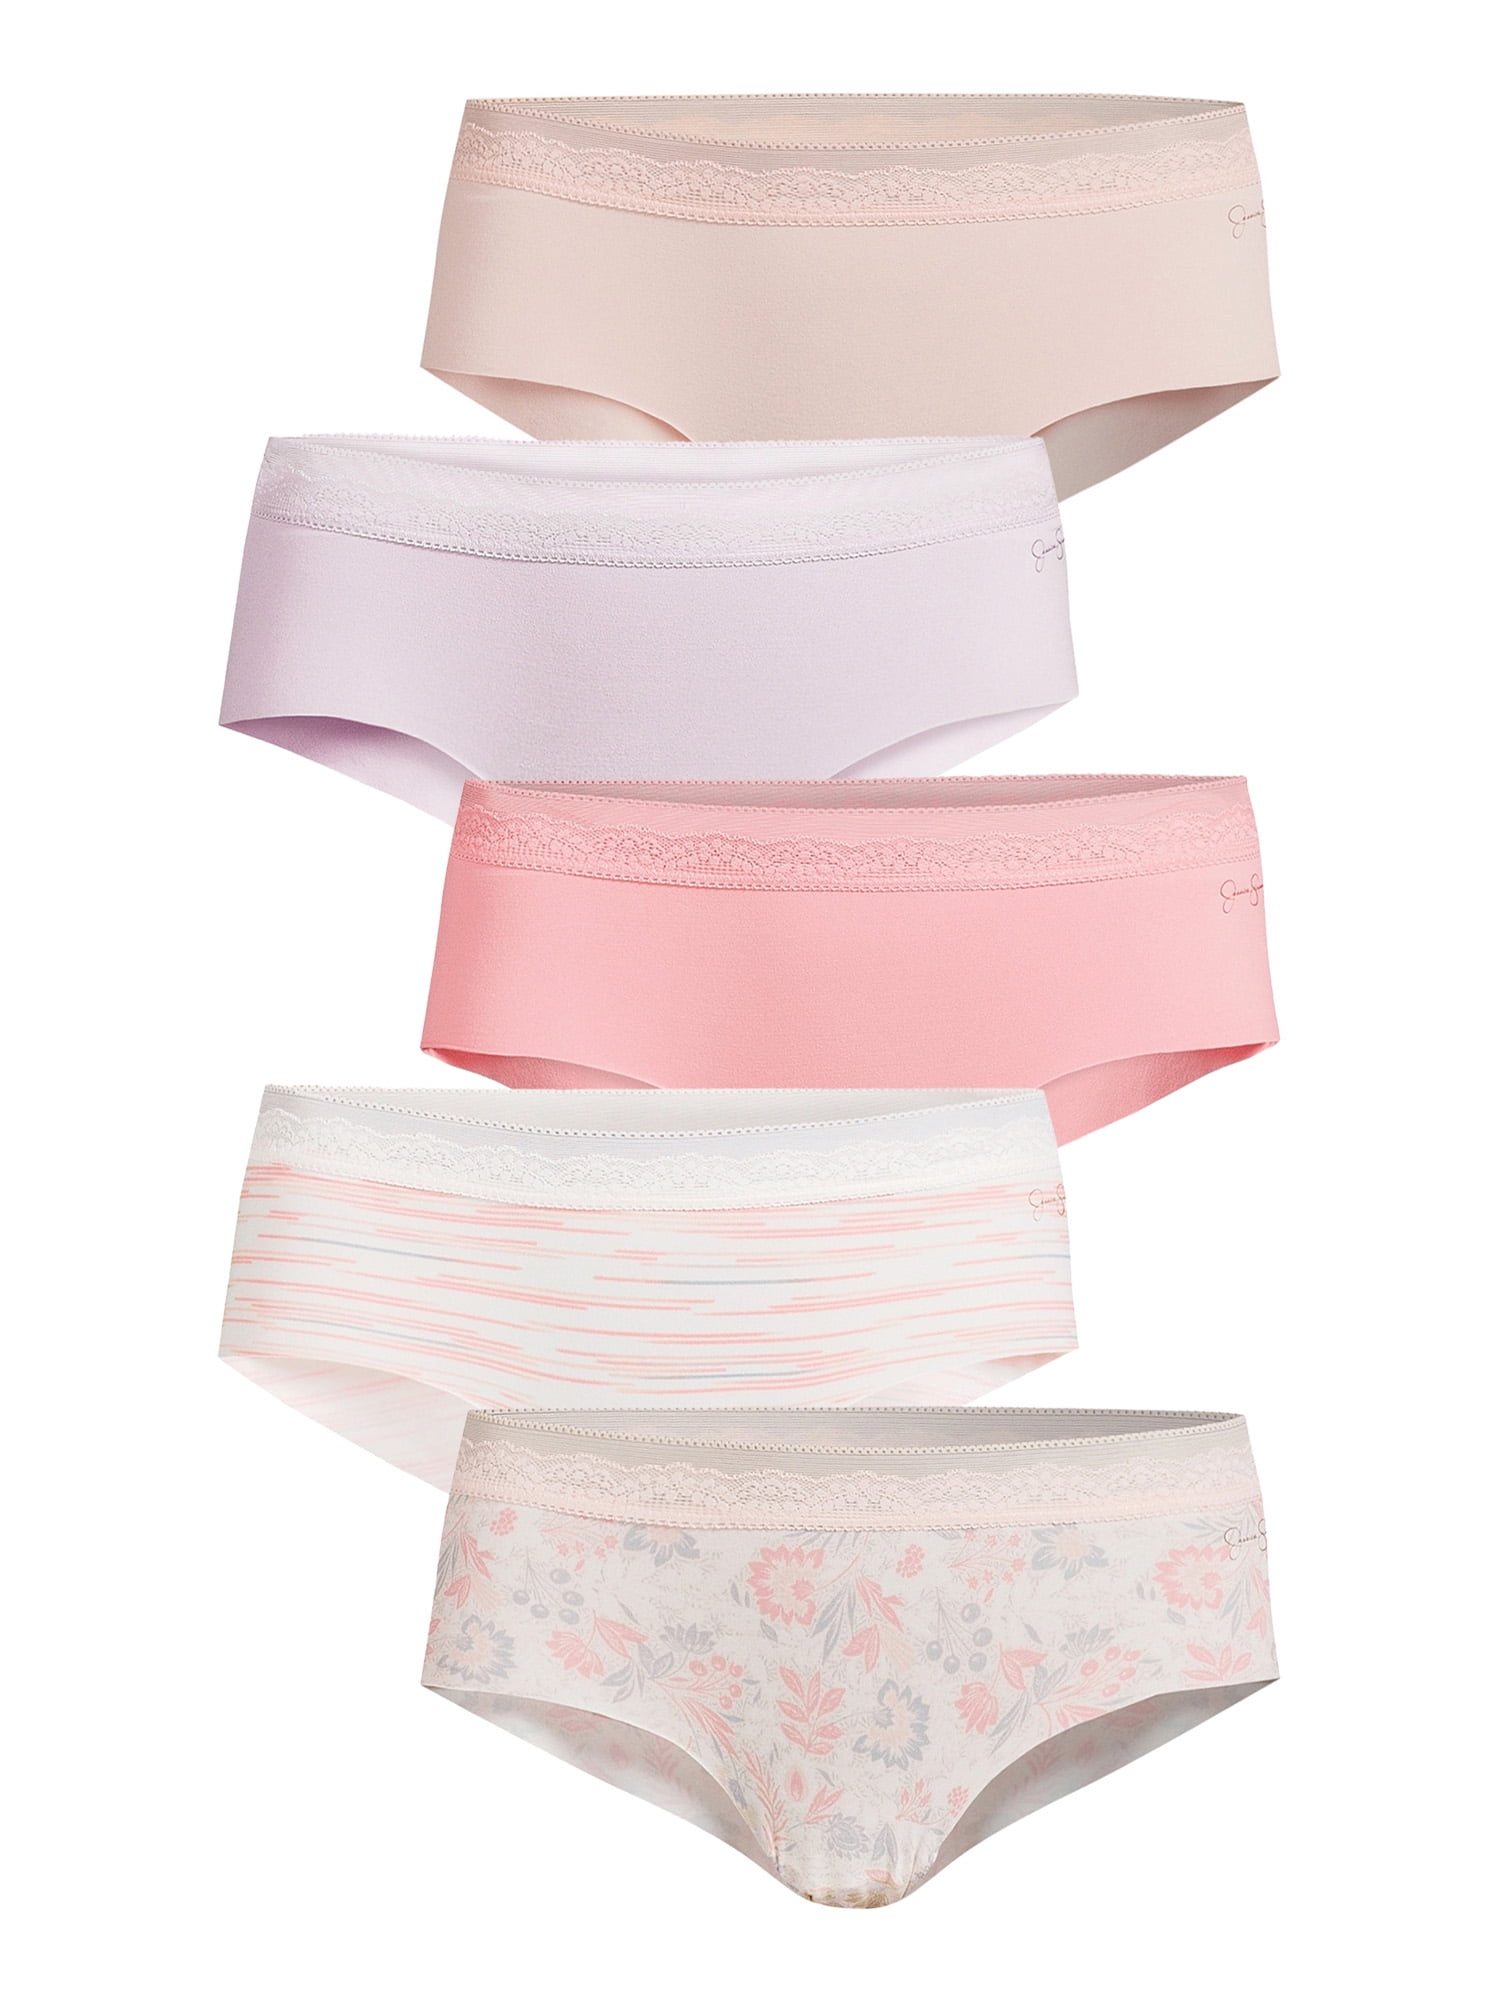 Jessica Simpson Women's Micro Bonded Hipster Panties, 5-Pack 